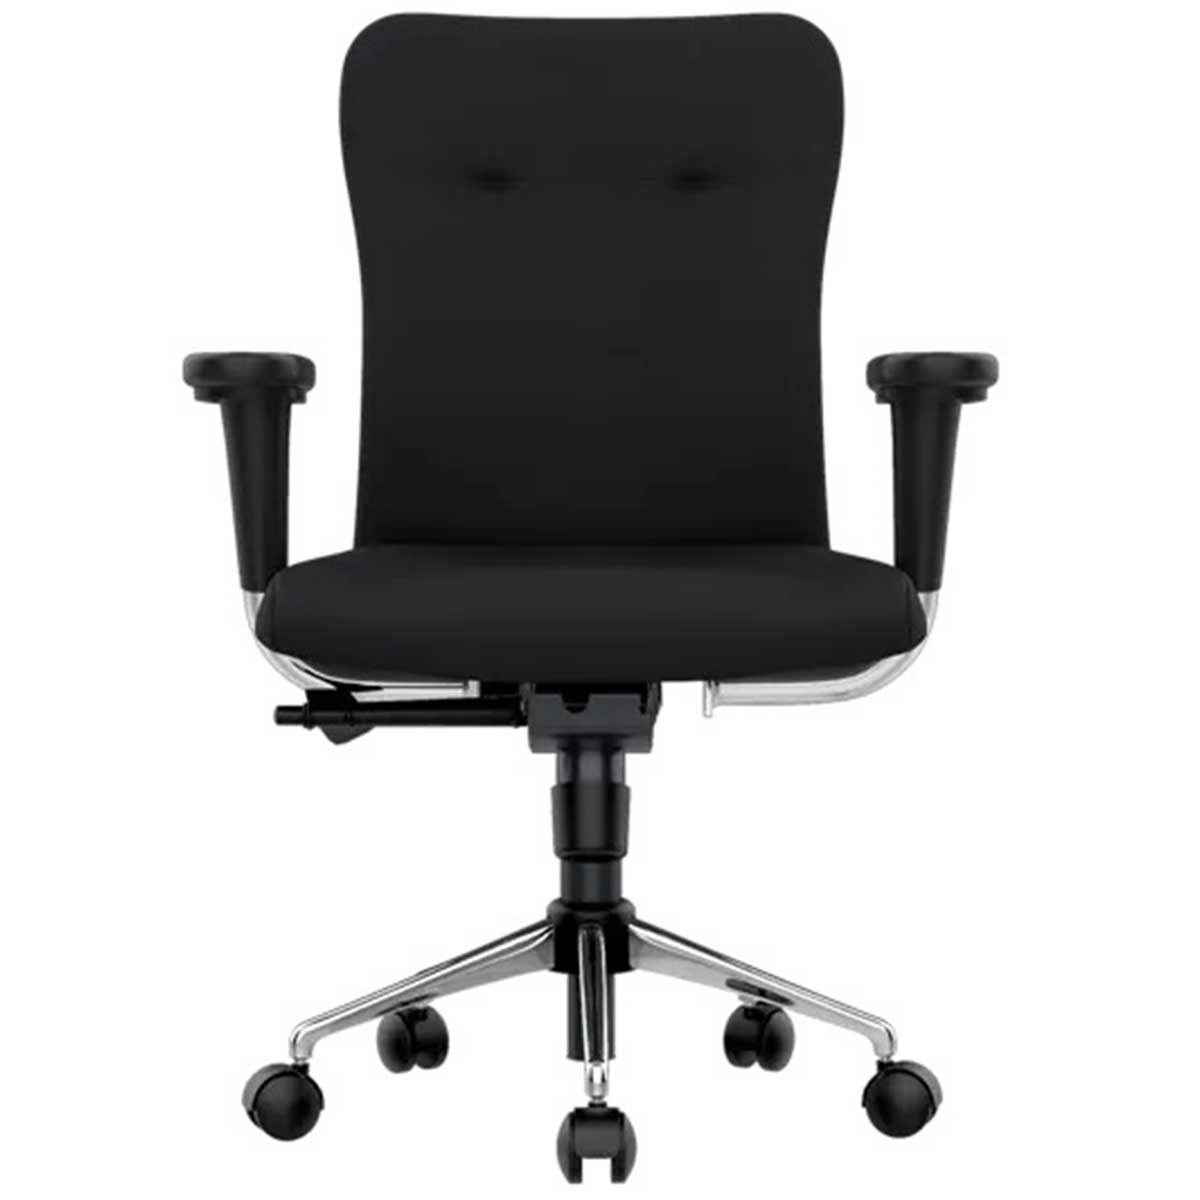 Fabric Office Chair Manufacturers, Suppliers in Mohan Cooperative Industrial Estate